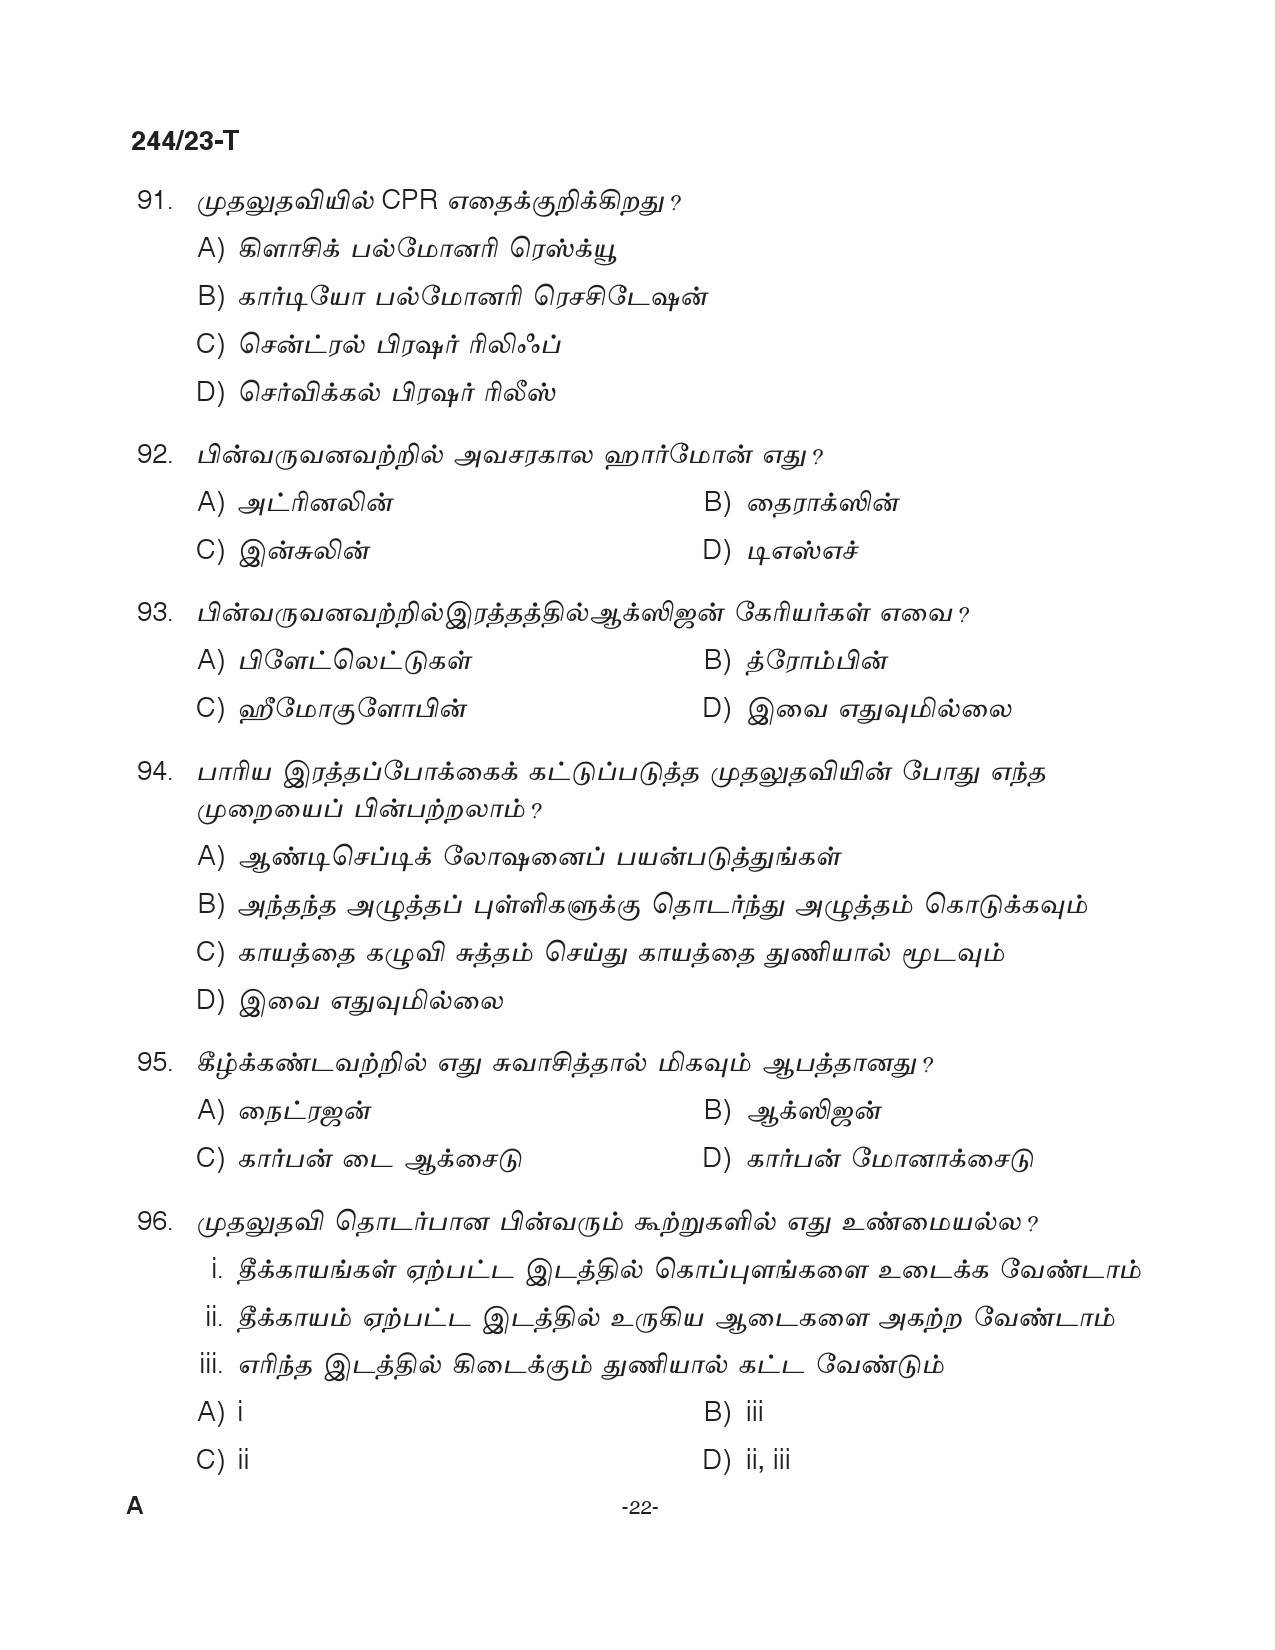 KPSC Fire and Rescue Officer Trainee Tamil Exam 2023 Code 2442023 T 21